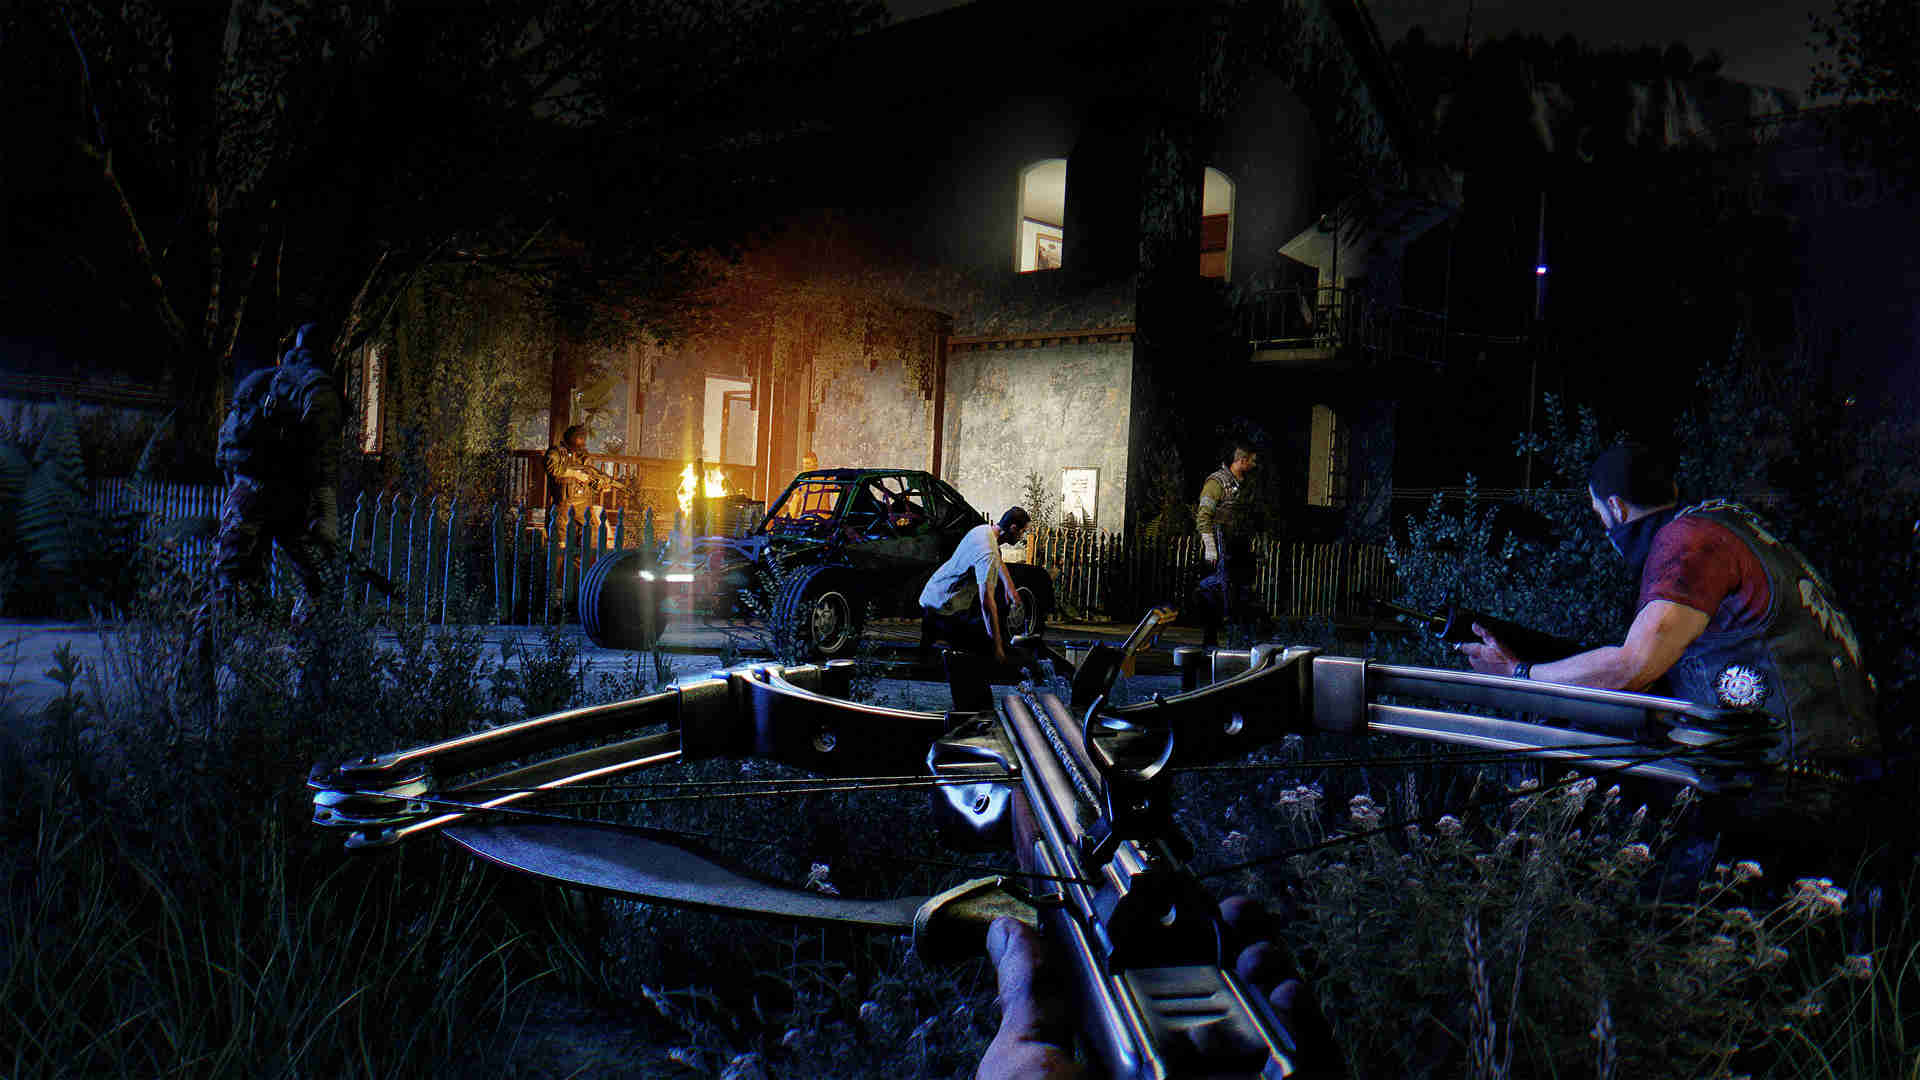 Dying Light Wallpapers - Dying Light The Following Enhanced Edition Crossbow - HD Wallpaper 